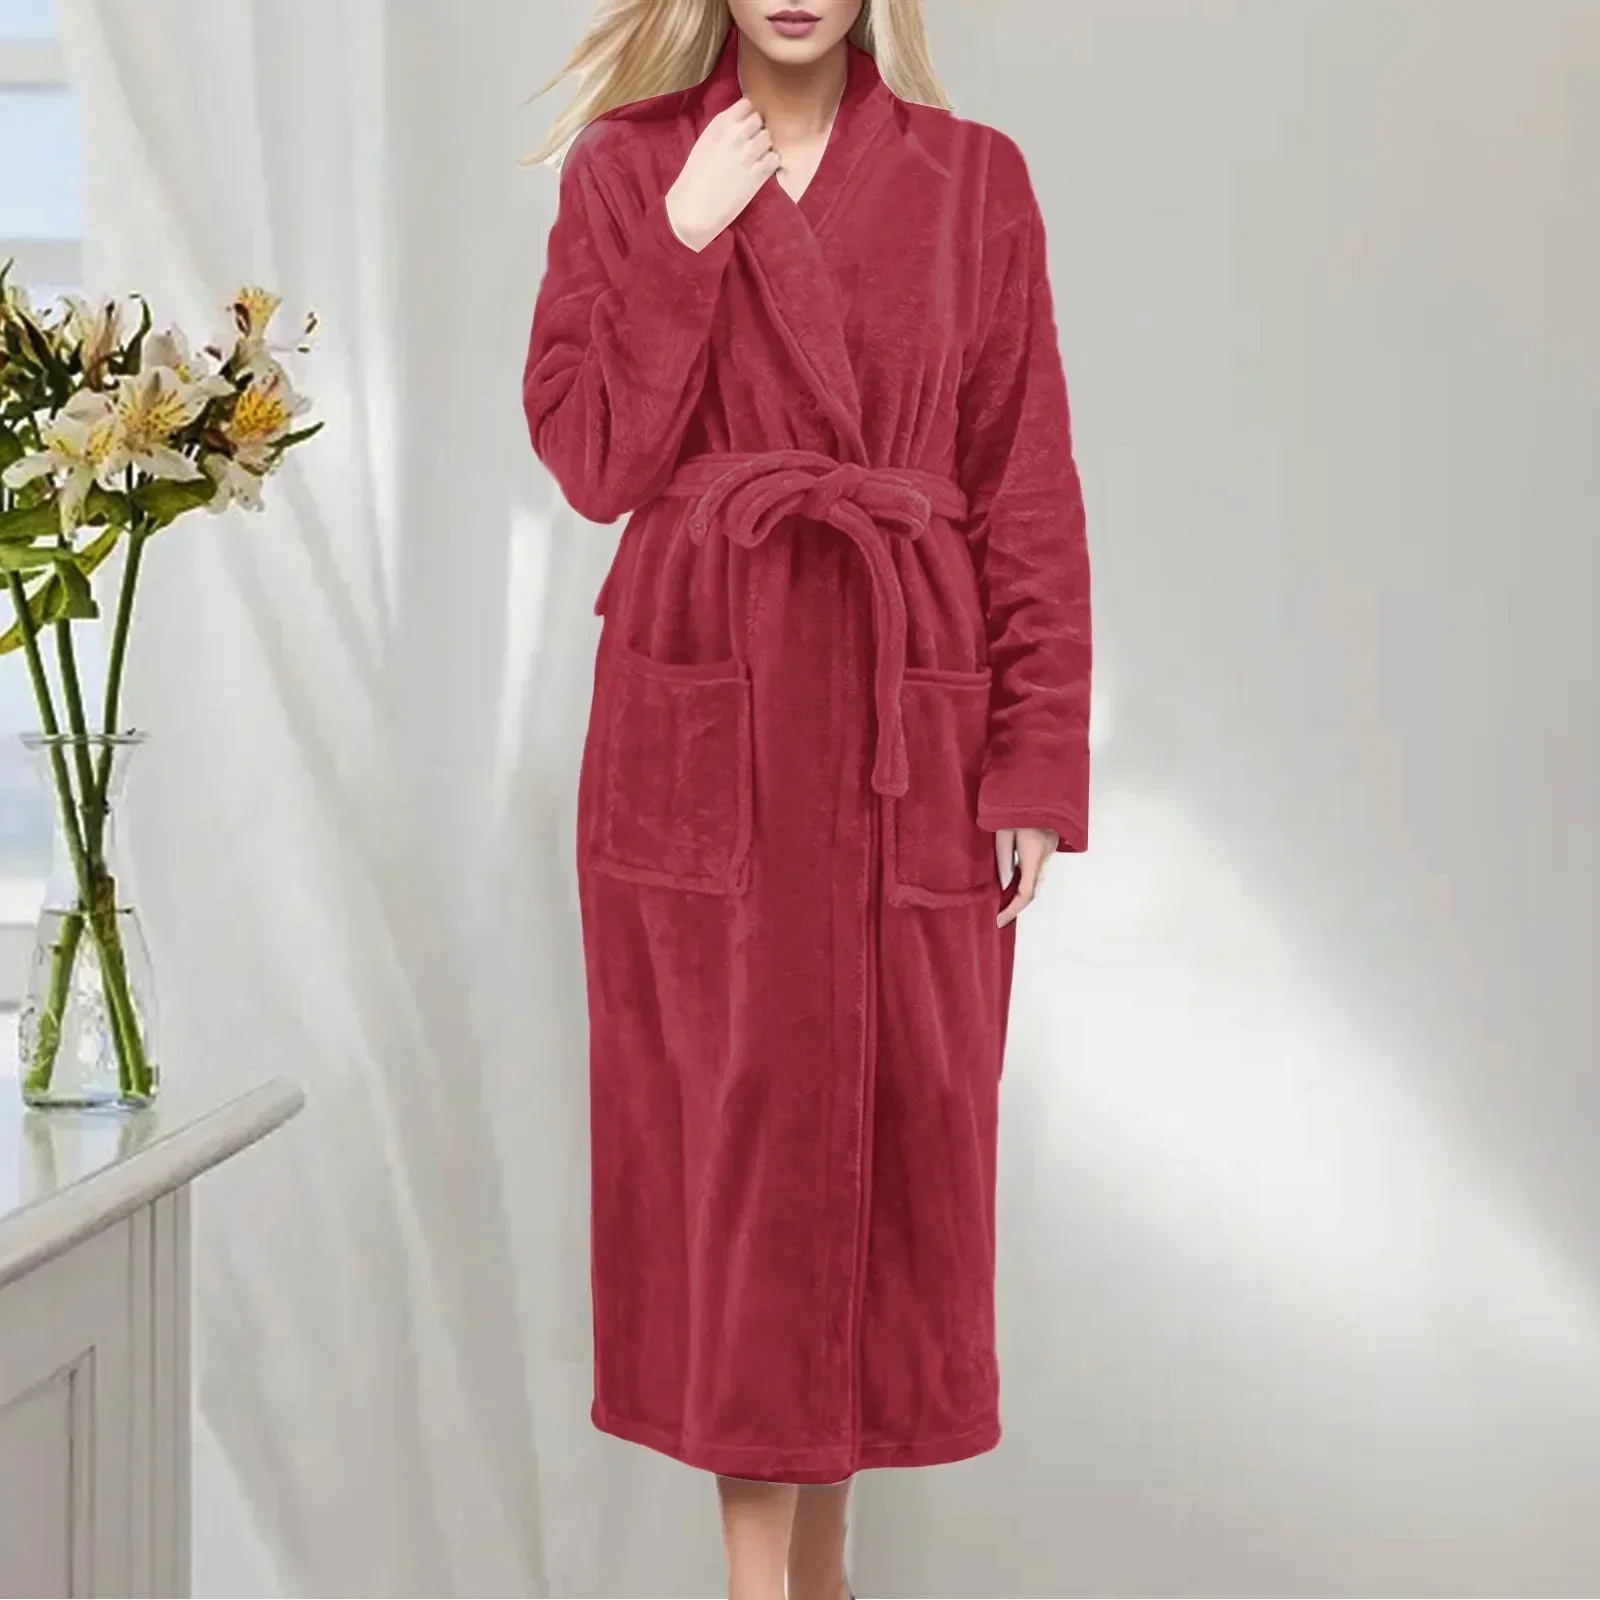 HAOLEI Ladies Dressing Gowns Fluffy,Hooded Long Nightgowns for Women UK  Fleece Robes Belted Full Length Bathrobes with Pockets Super Soft Plush  Velvet Flannel Pyjamas Winter Teddy Loungewear : Amazon.co.uk: Fashion